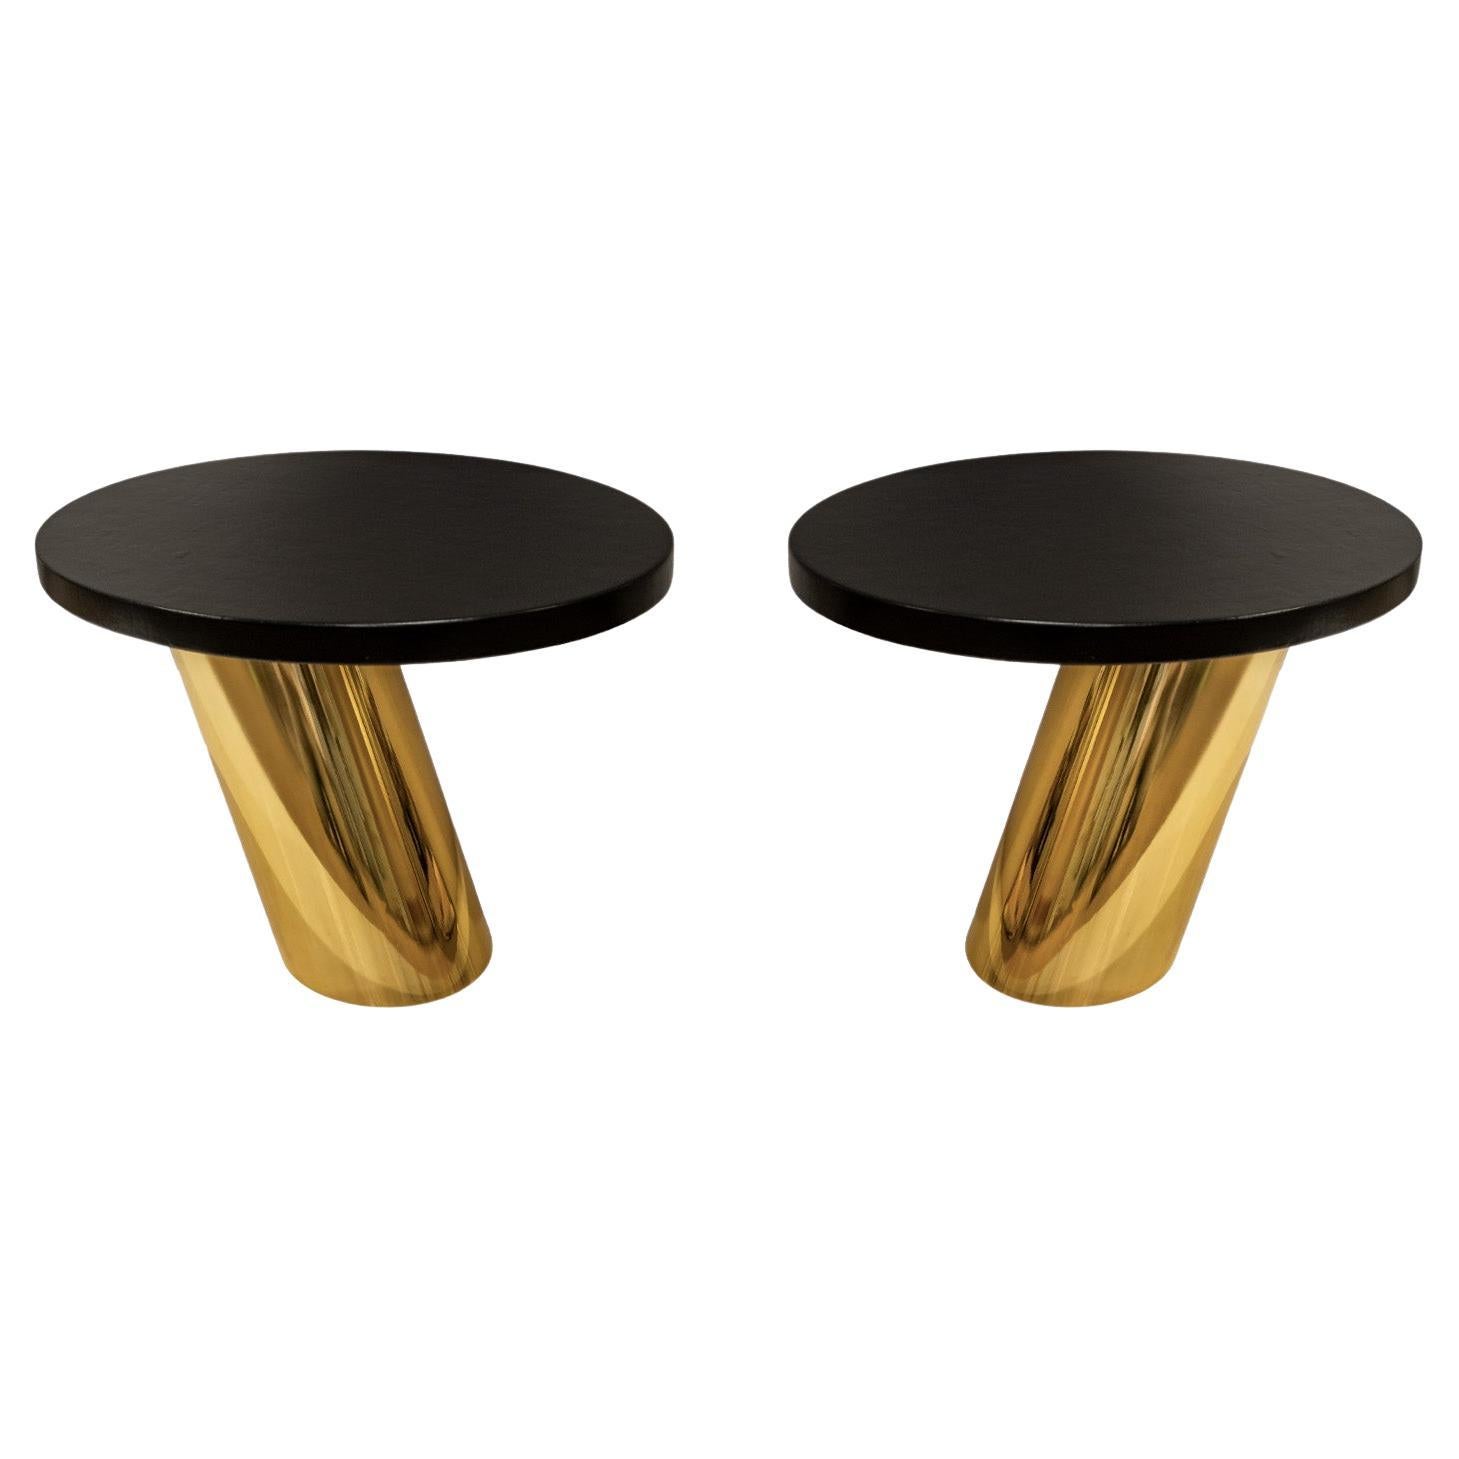 Karl Springer Rare Pair of Cantilevered "Mushroom Tables" 1990 Signed and Dated For Sale